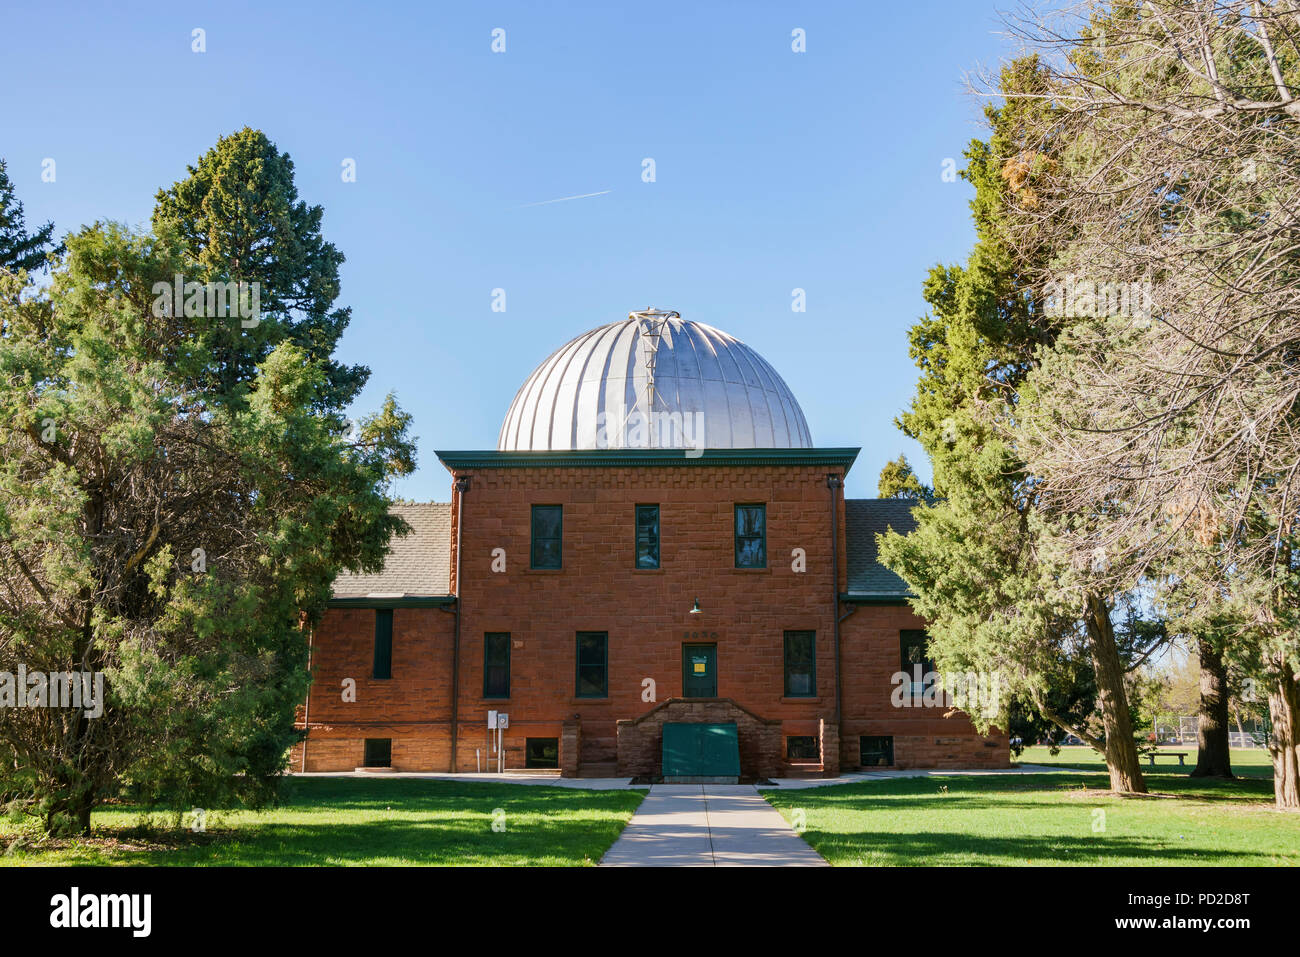 Exterior view of the Chamberlin Observatory at Denver, Colorado Stock Photo